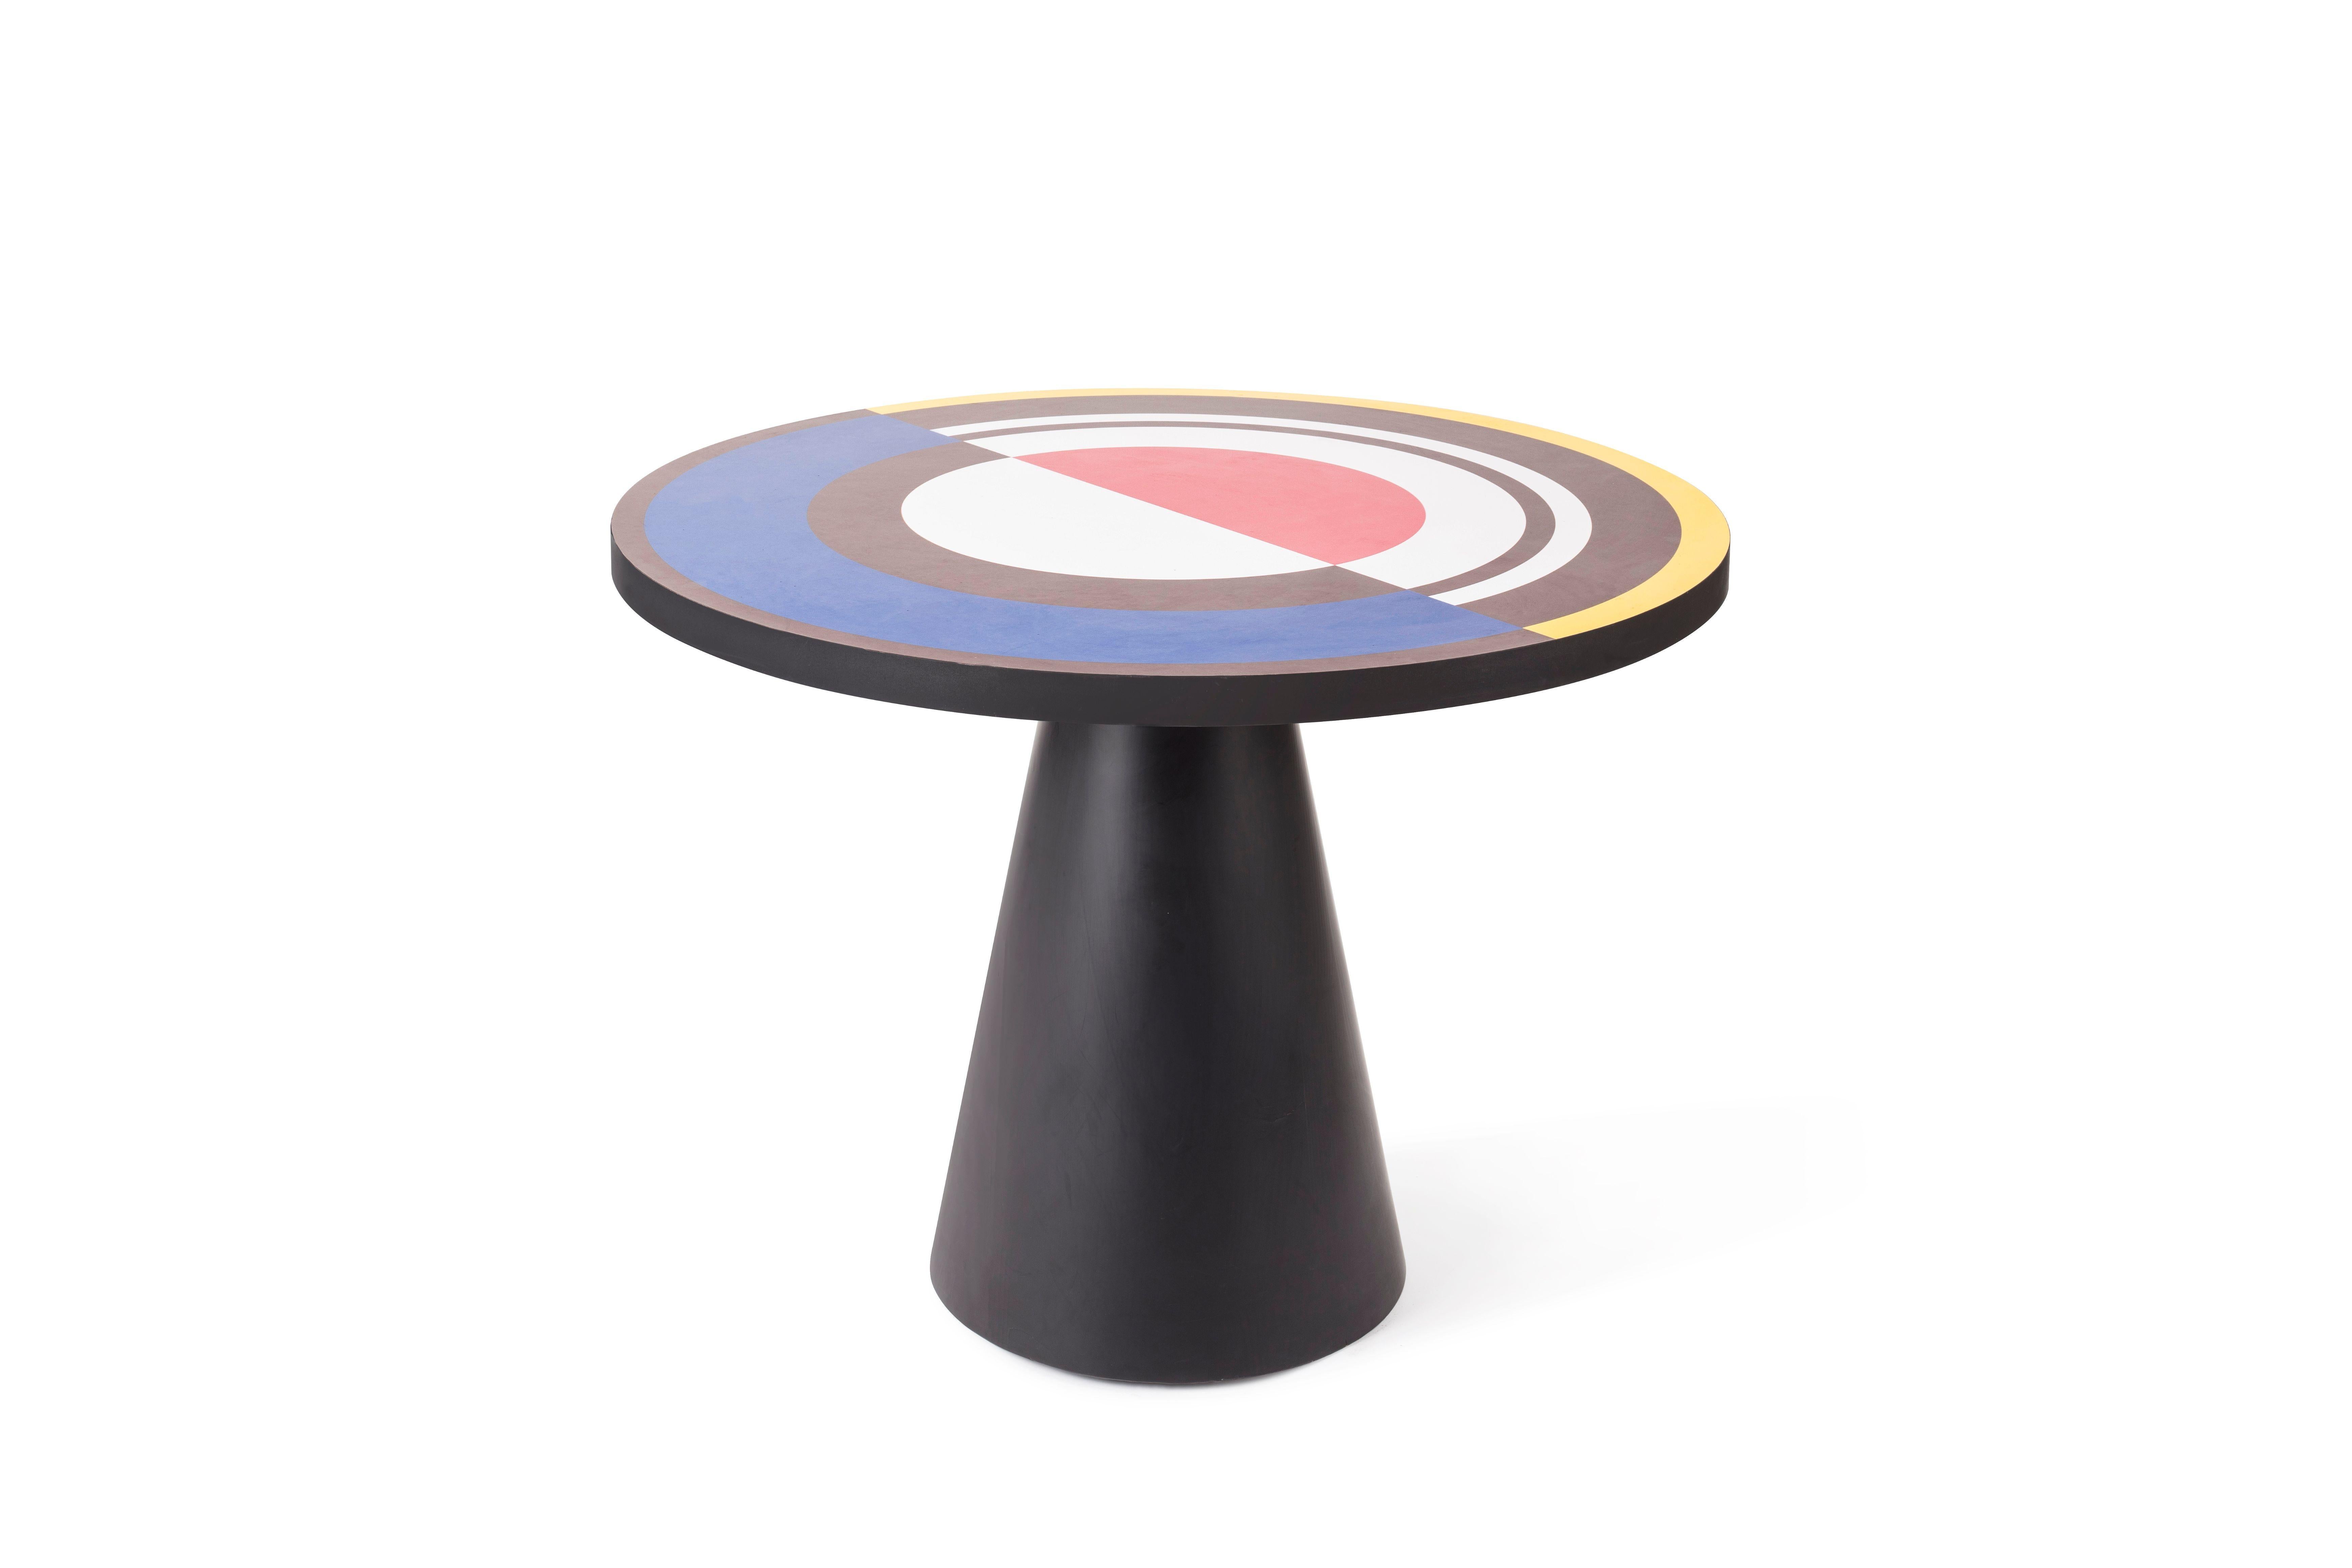 Homage to Delaunay dining table by Thomas Dariel
Diameter 80 or diameter 100 or diameter 115 x height 74 cm
Structure in MDF • Base painted in matte colour finish
Printed laminate top
Sonia et Cætera pays homage to the famous French painter